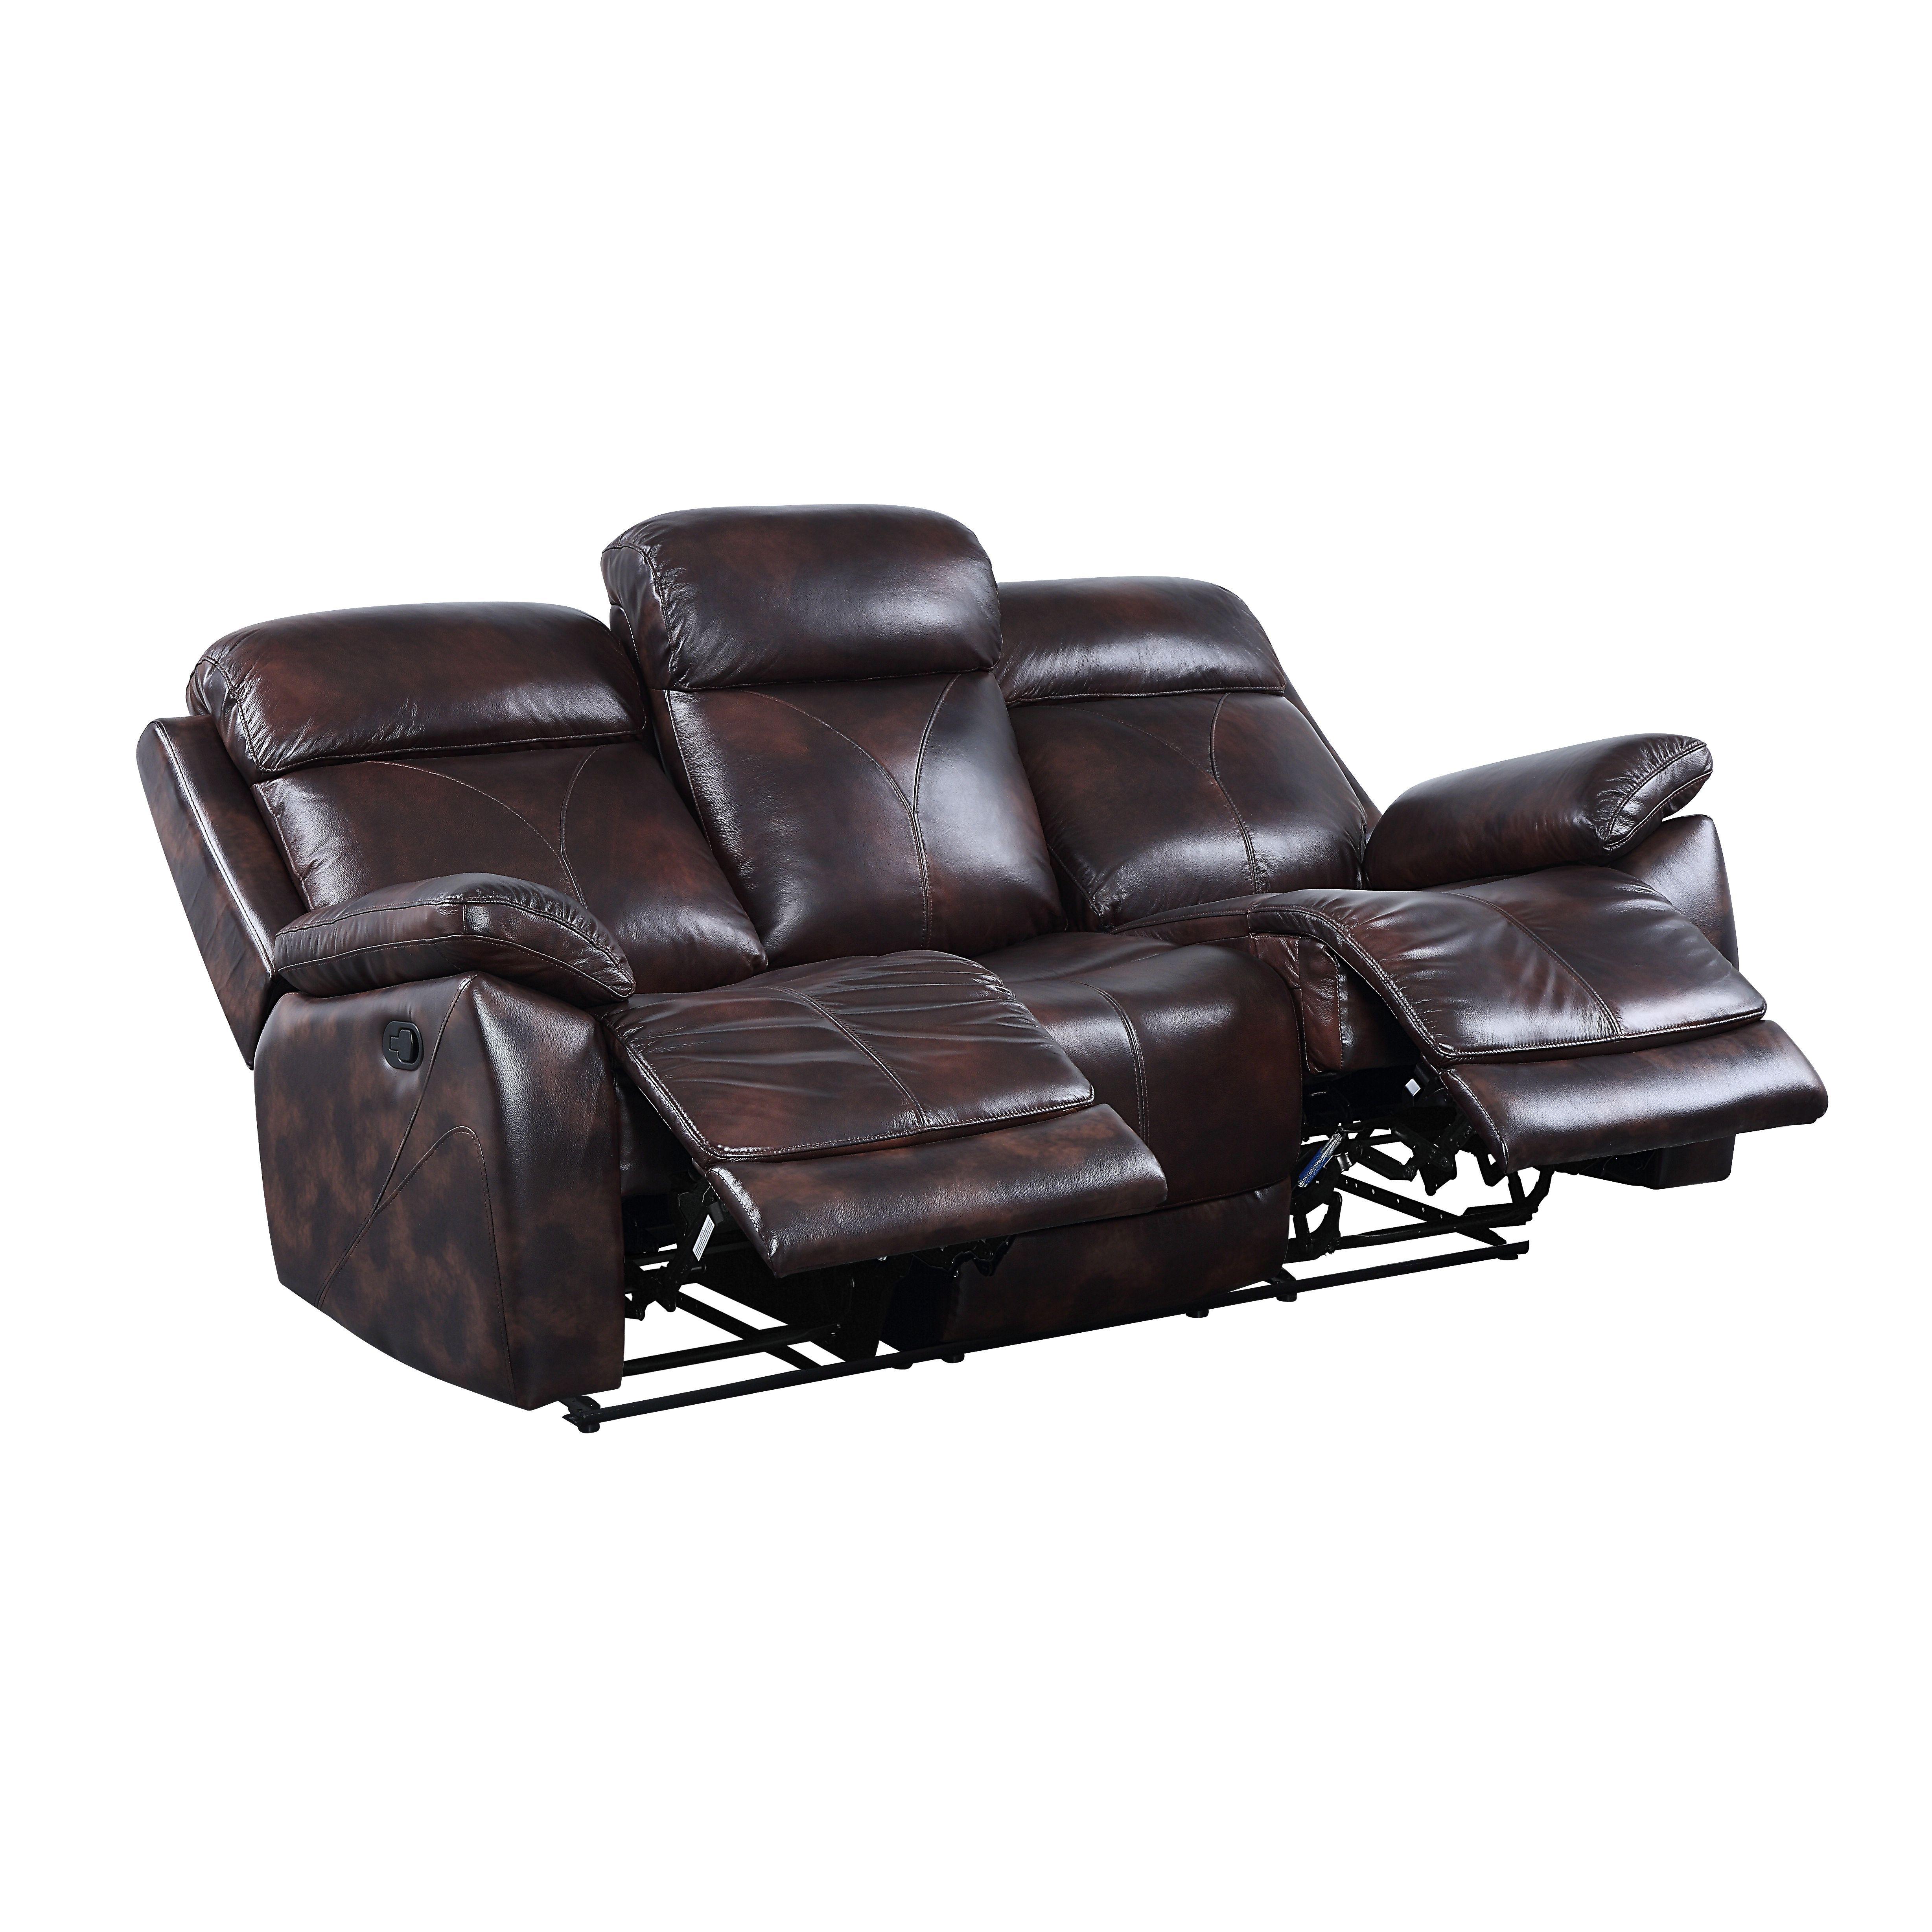 

    
Contemporary Dark Brown Leather Sofa + Loveseat + Recliner by Acme Perfiel LV00066-3pcs
